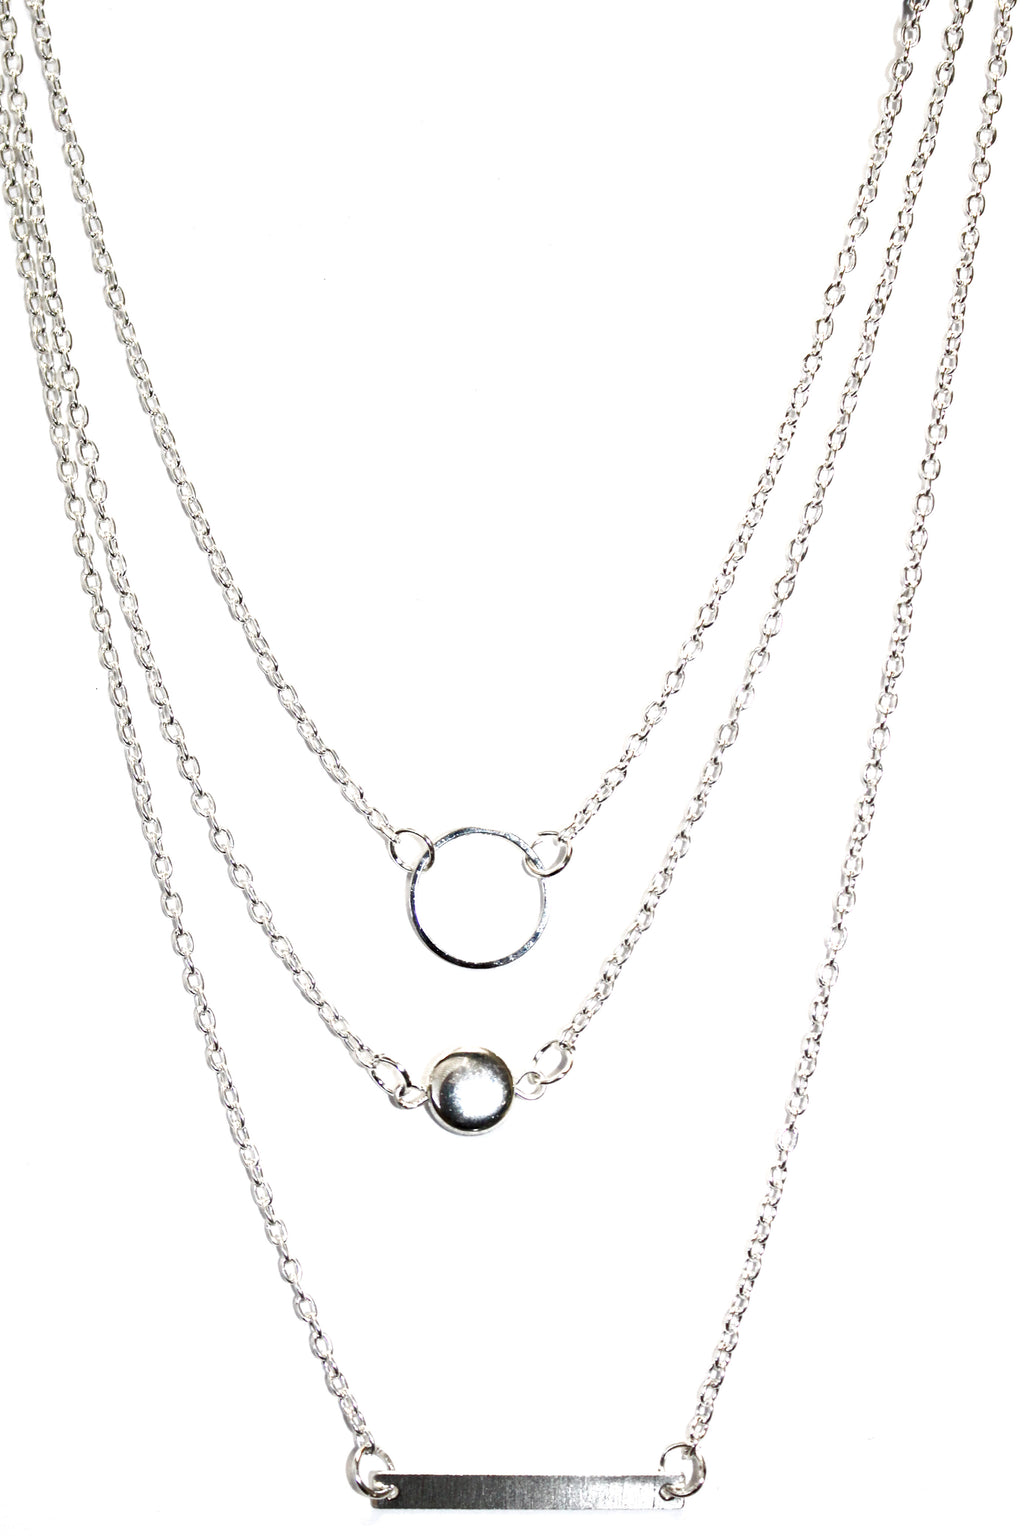 Simple Silver Tone 3 Layer Dainty Necklace